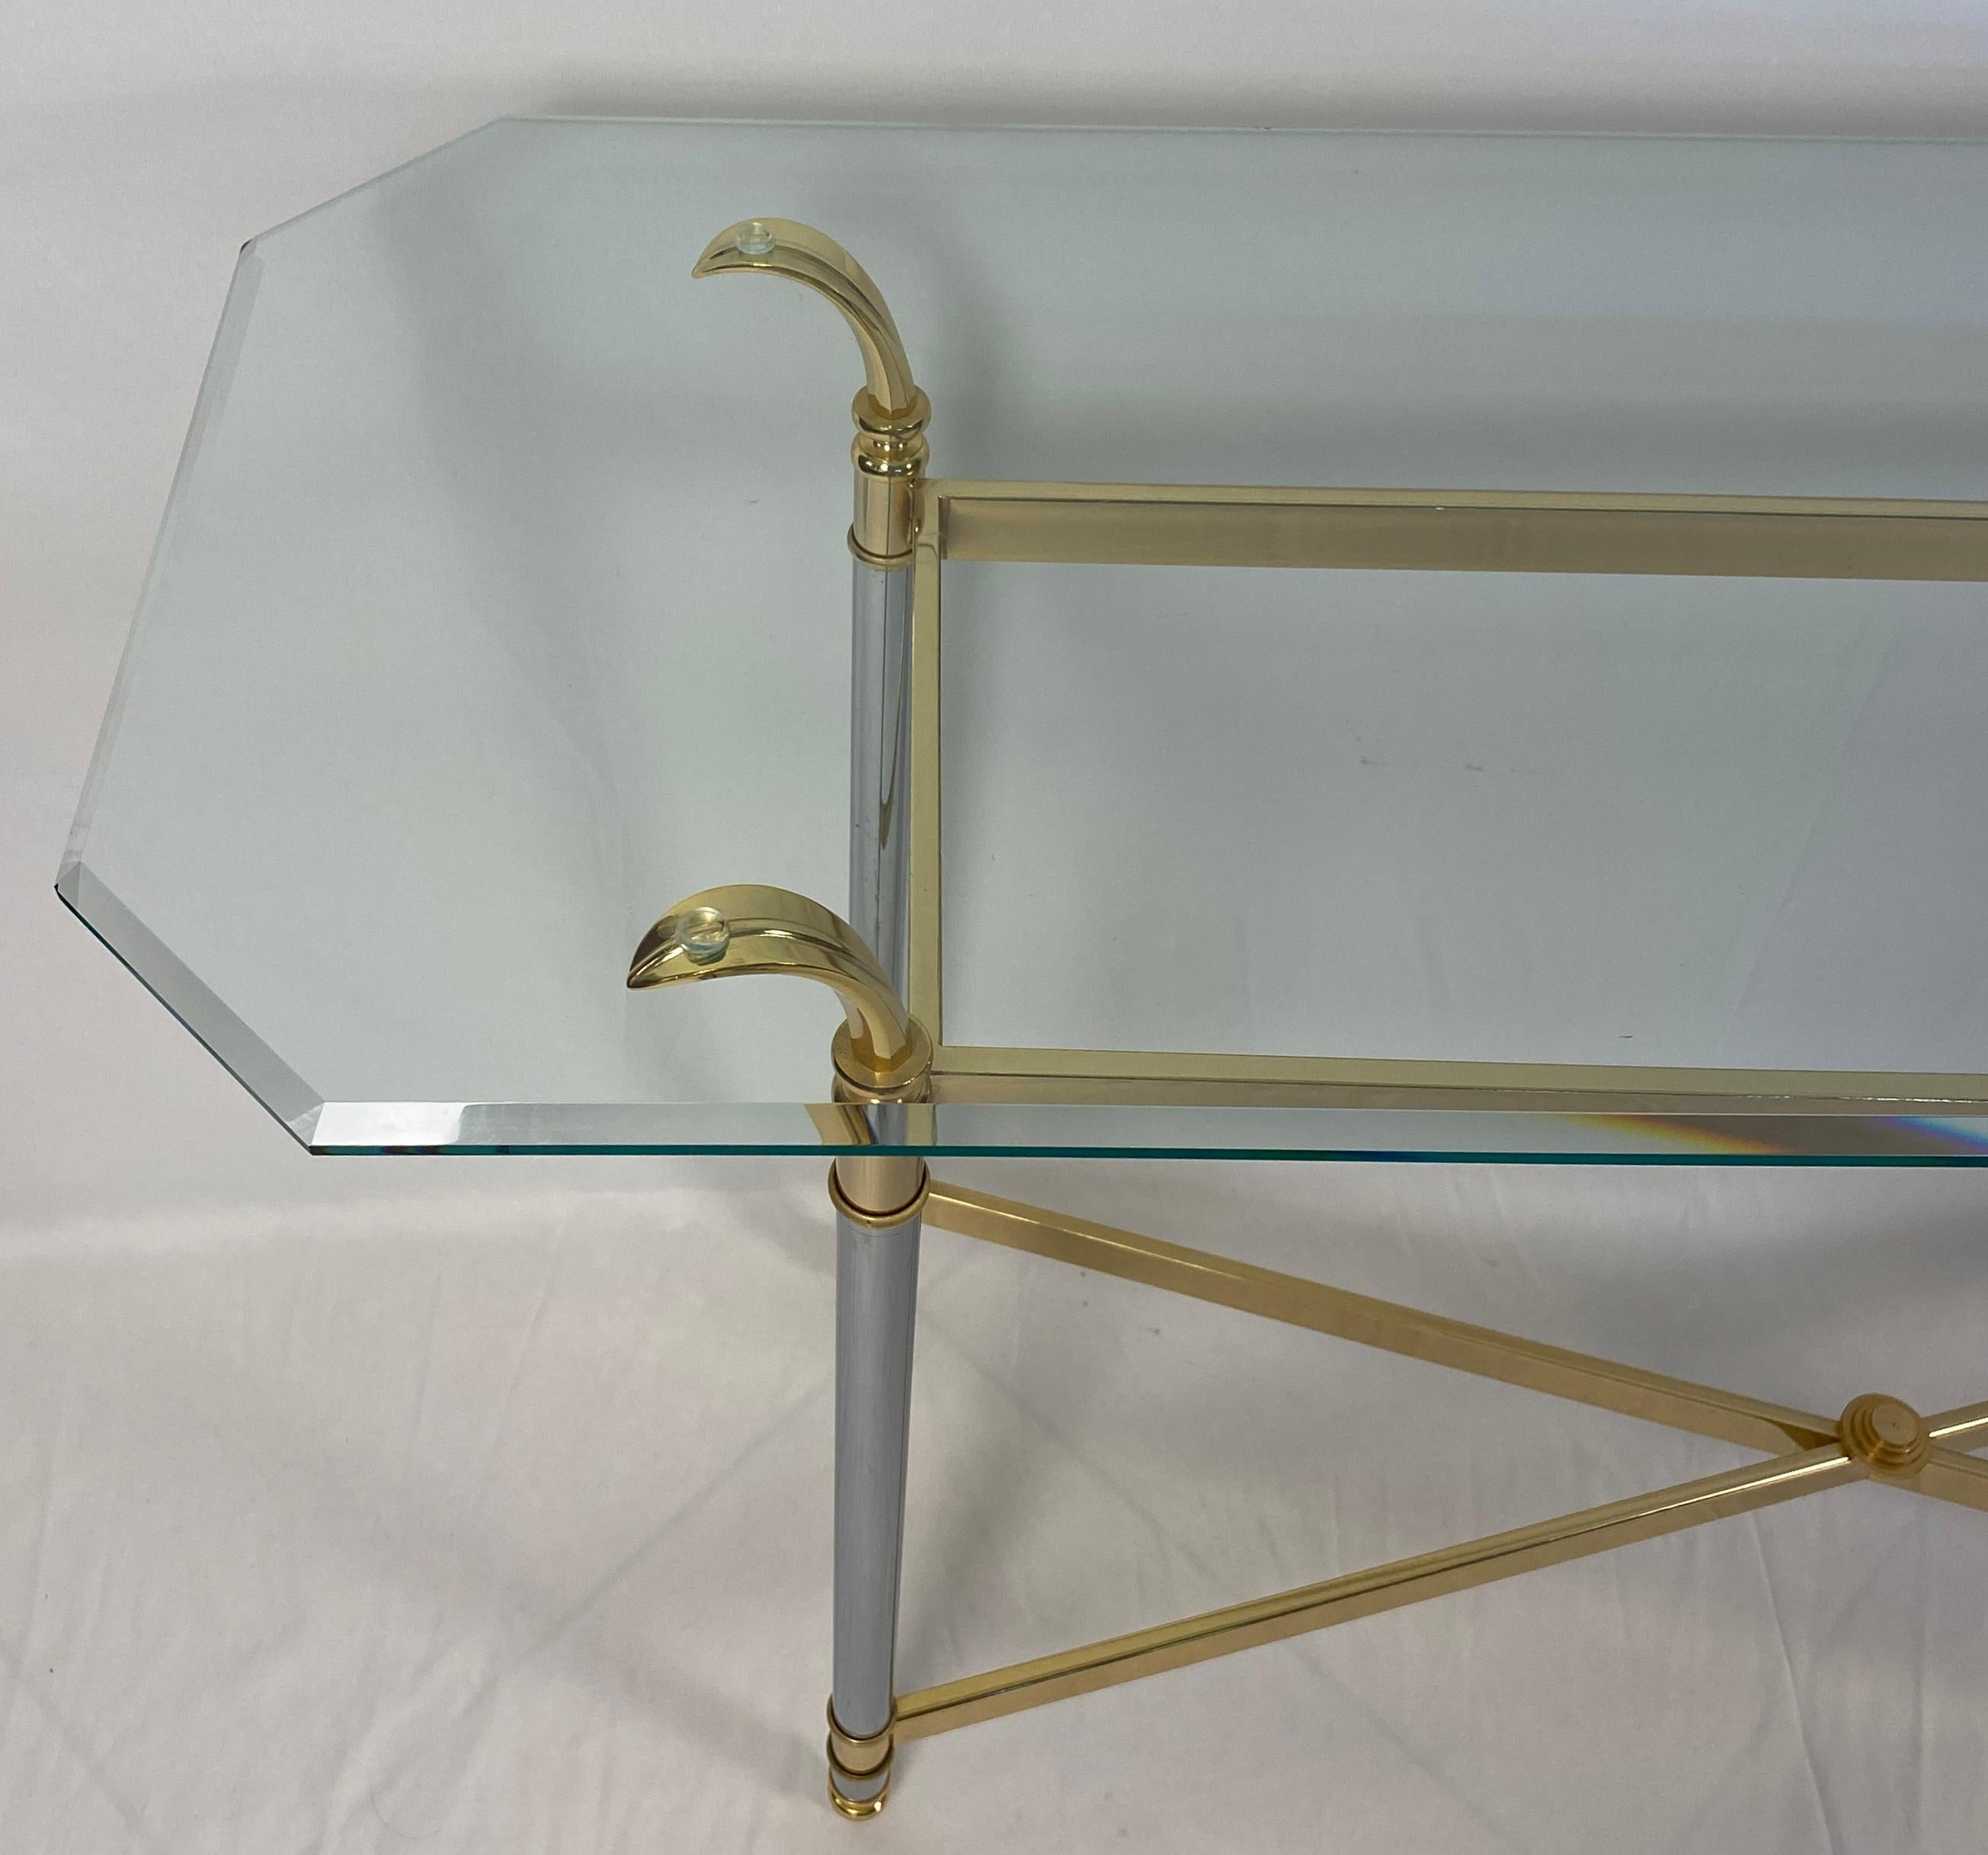 Polished Maison Jansen Mid-Century Modern Brass and Glass Console Table or Sofa Table